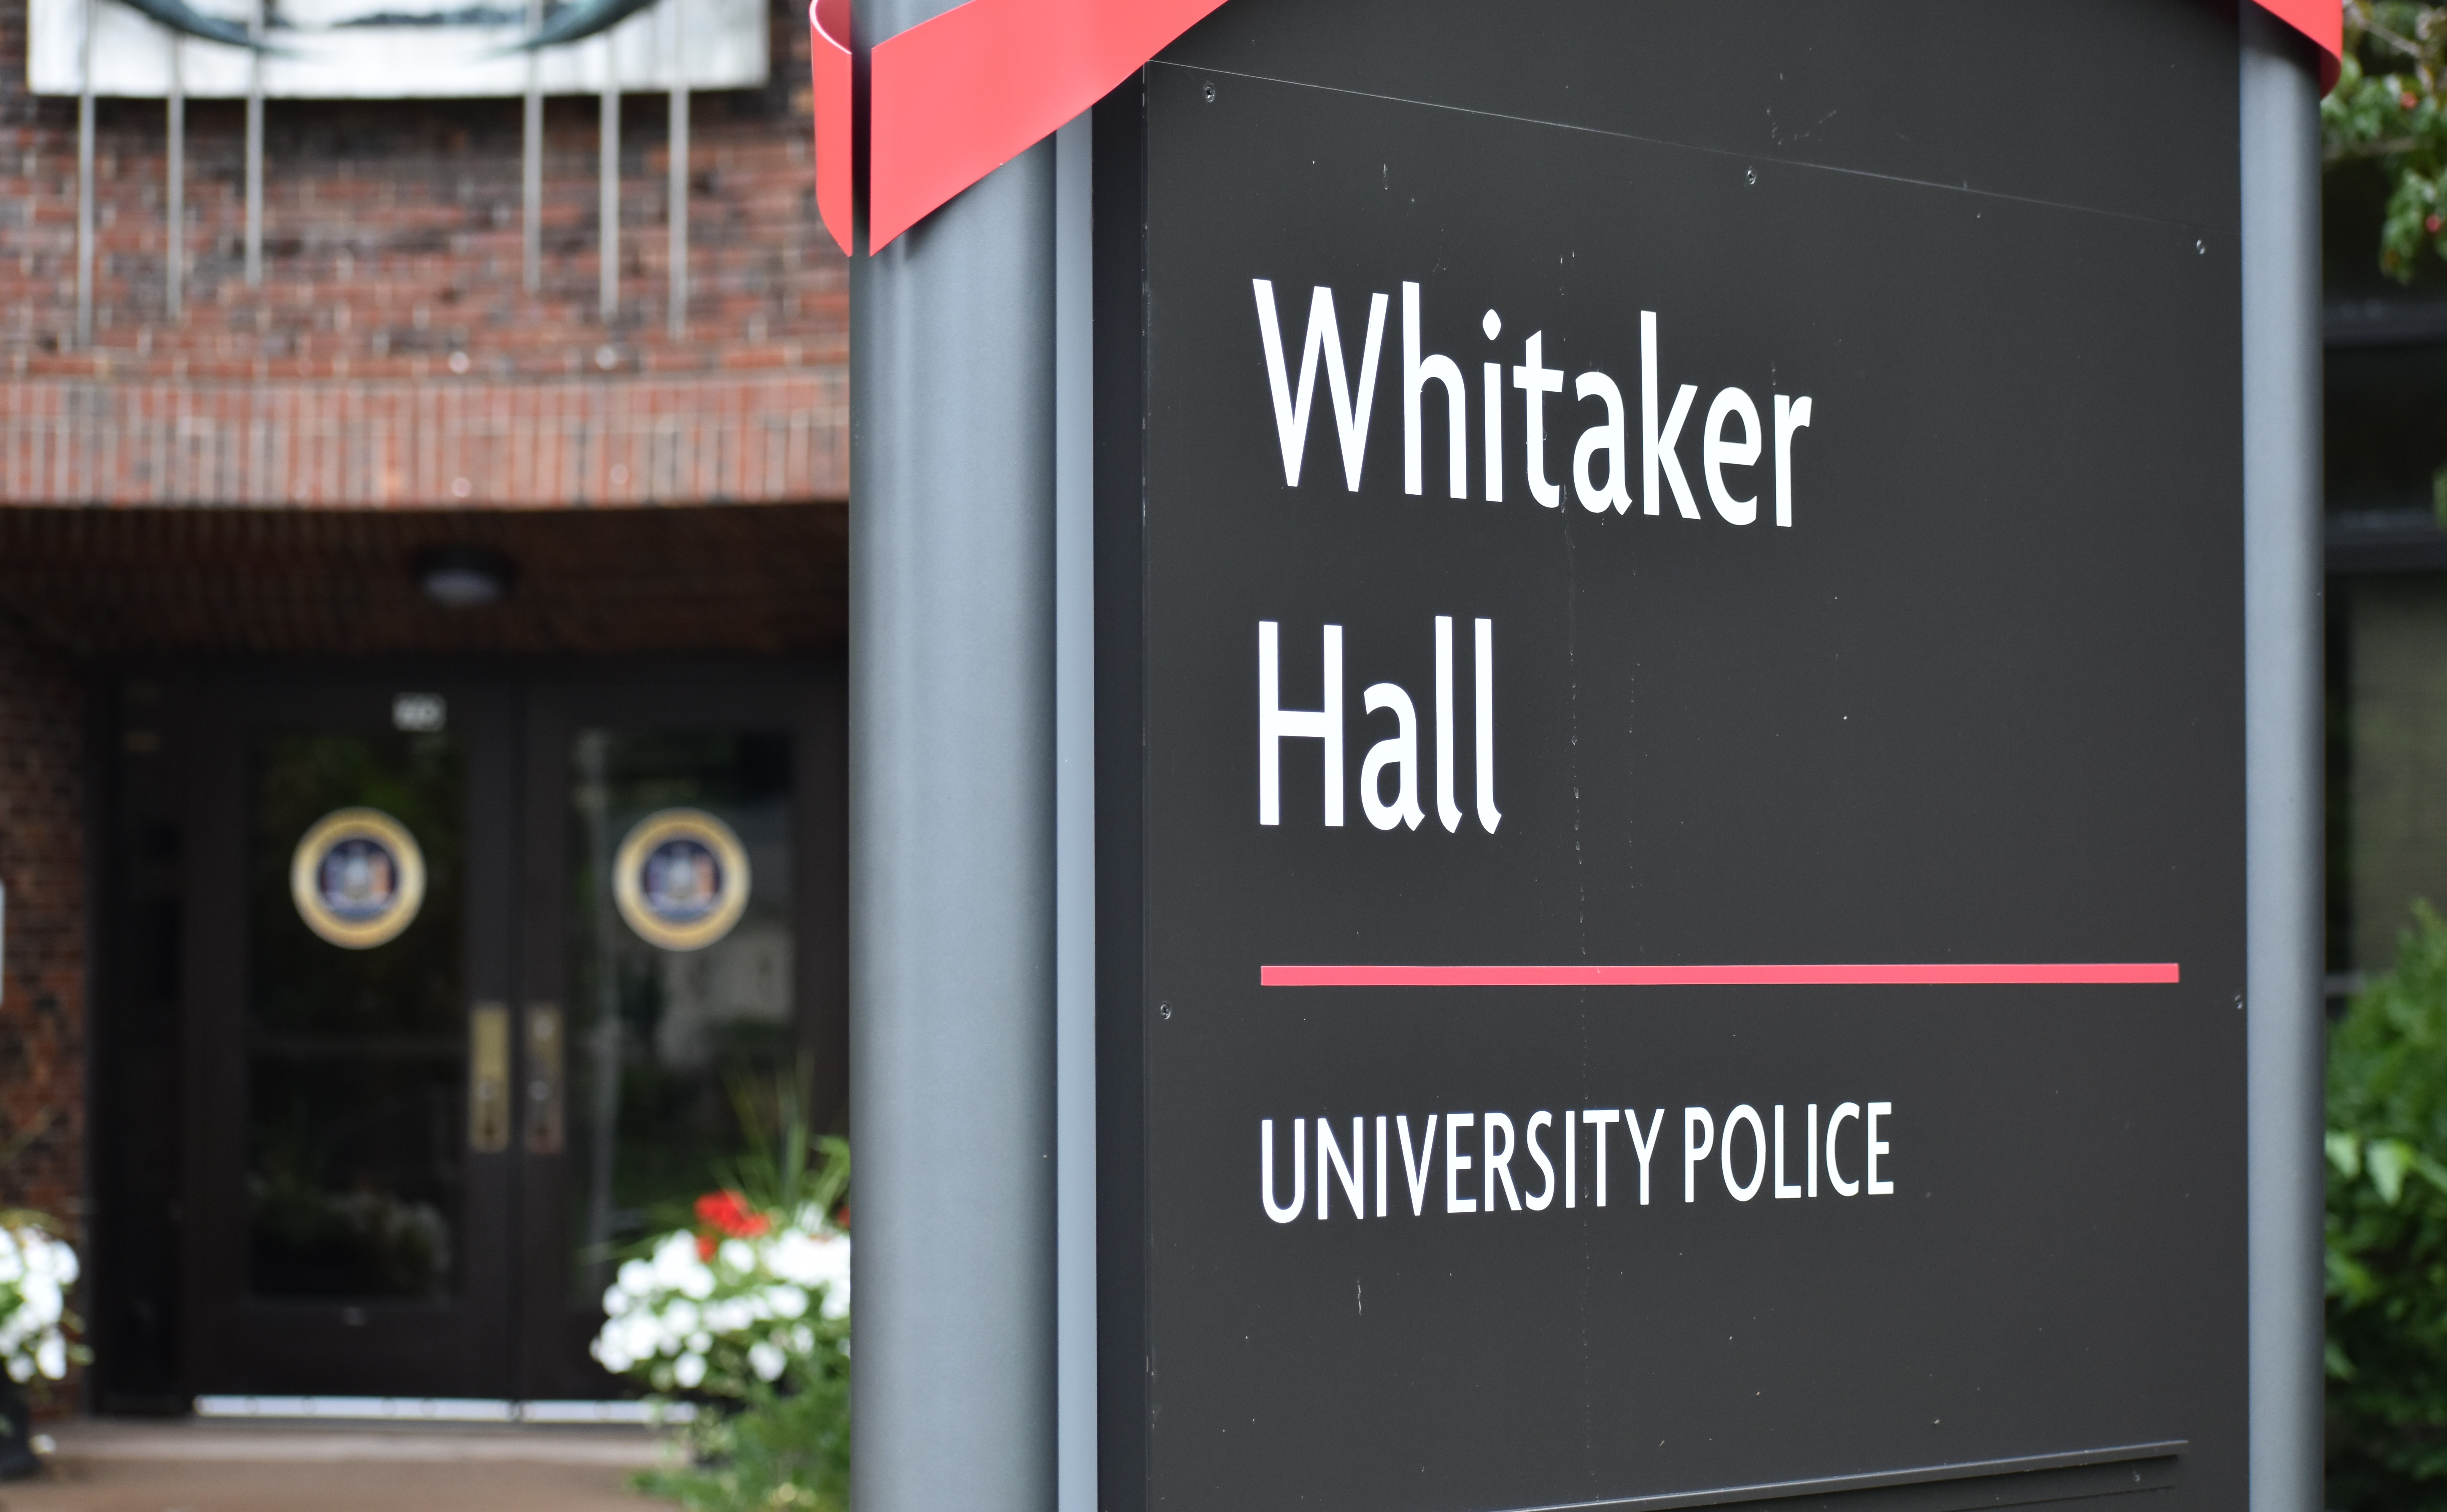 A sign on campus that reads "Whitaker Hall, University Police"